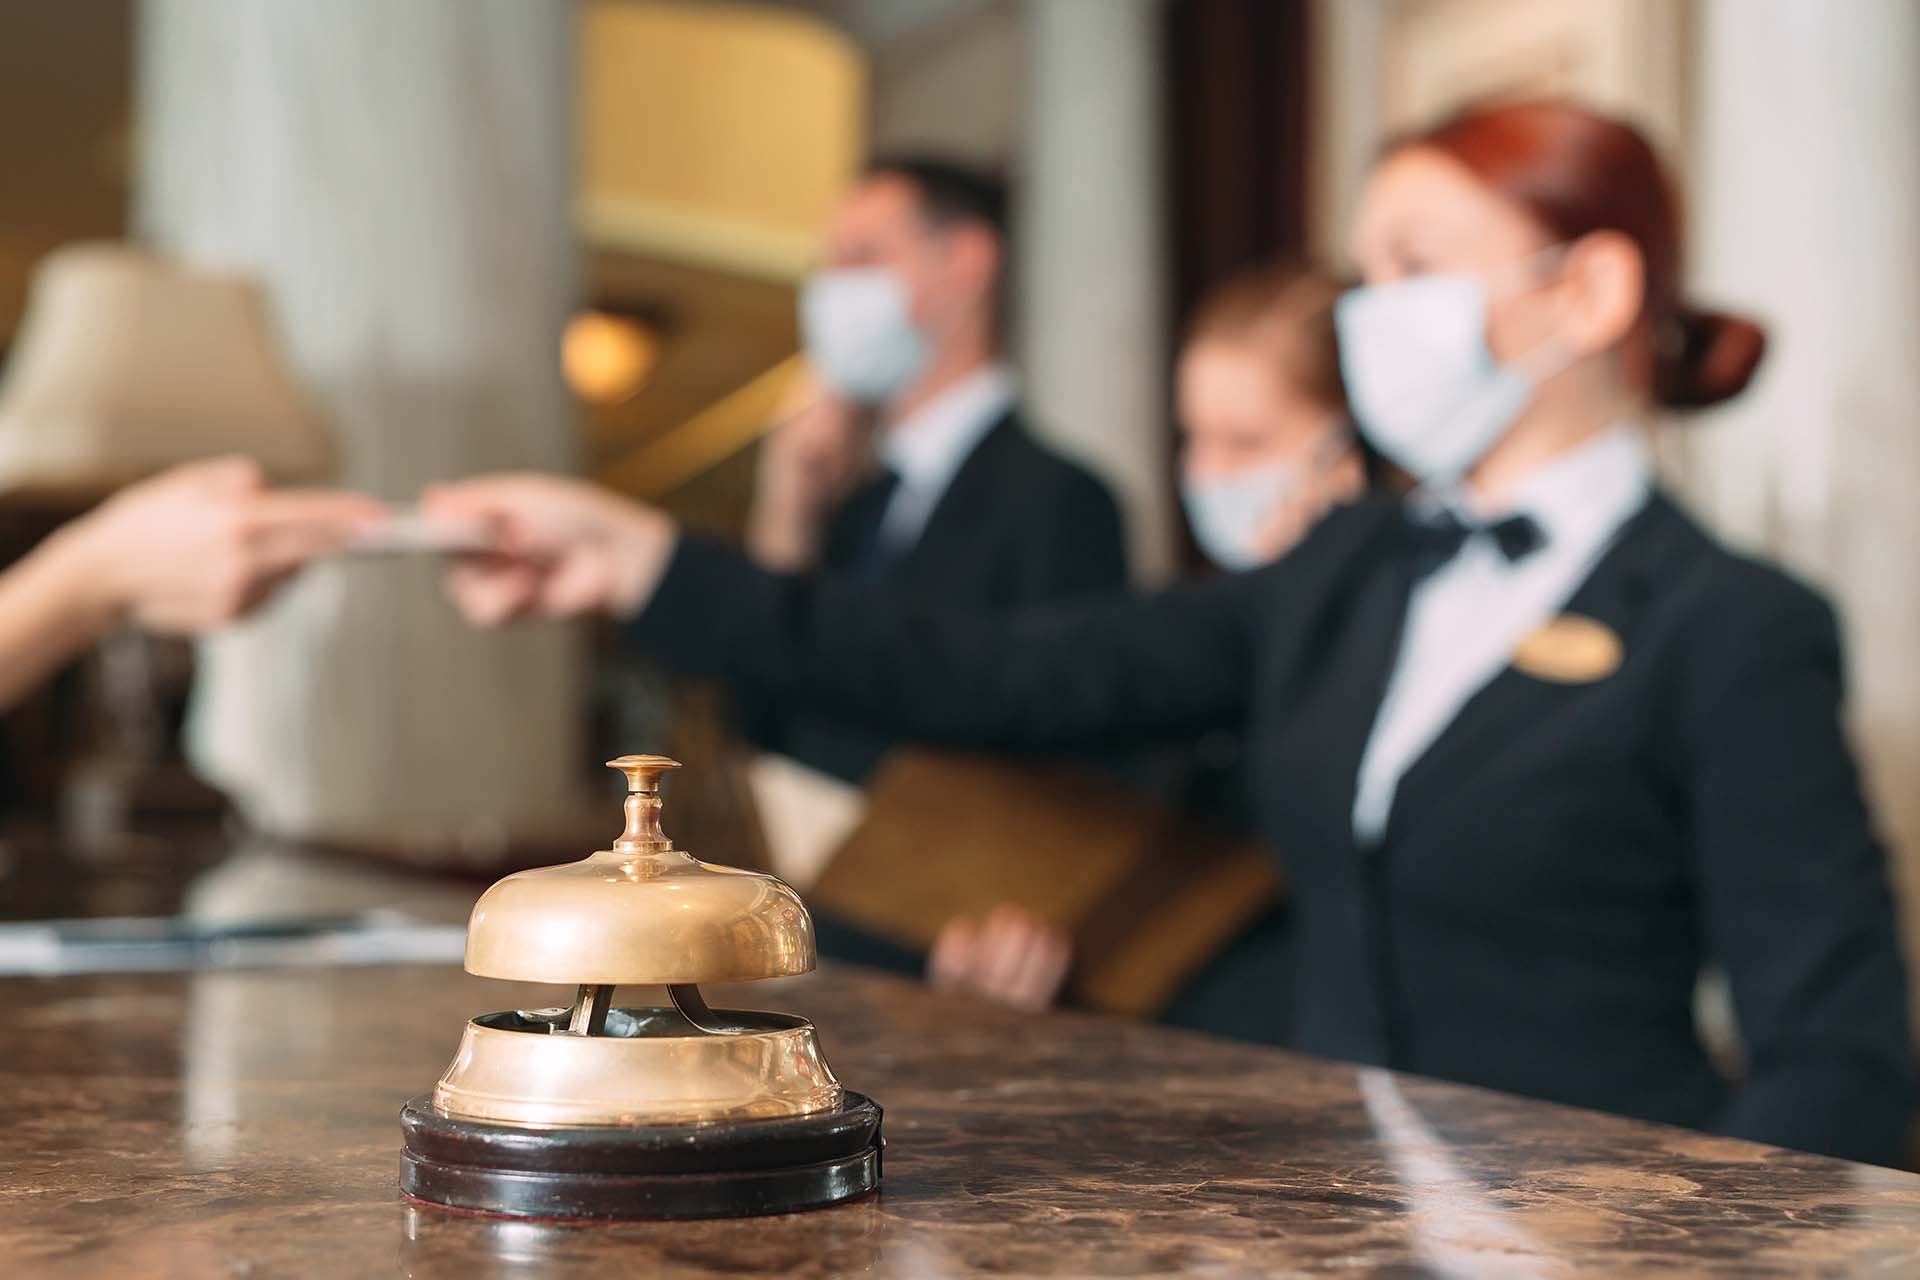 Hotel Safety Management—Reducing Lost Time